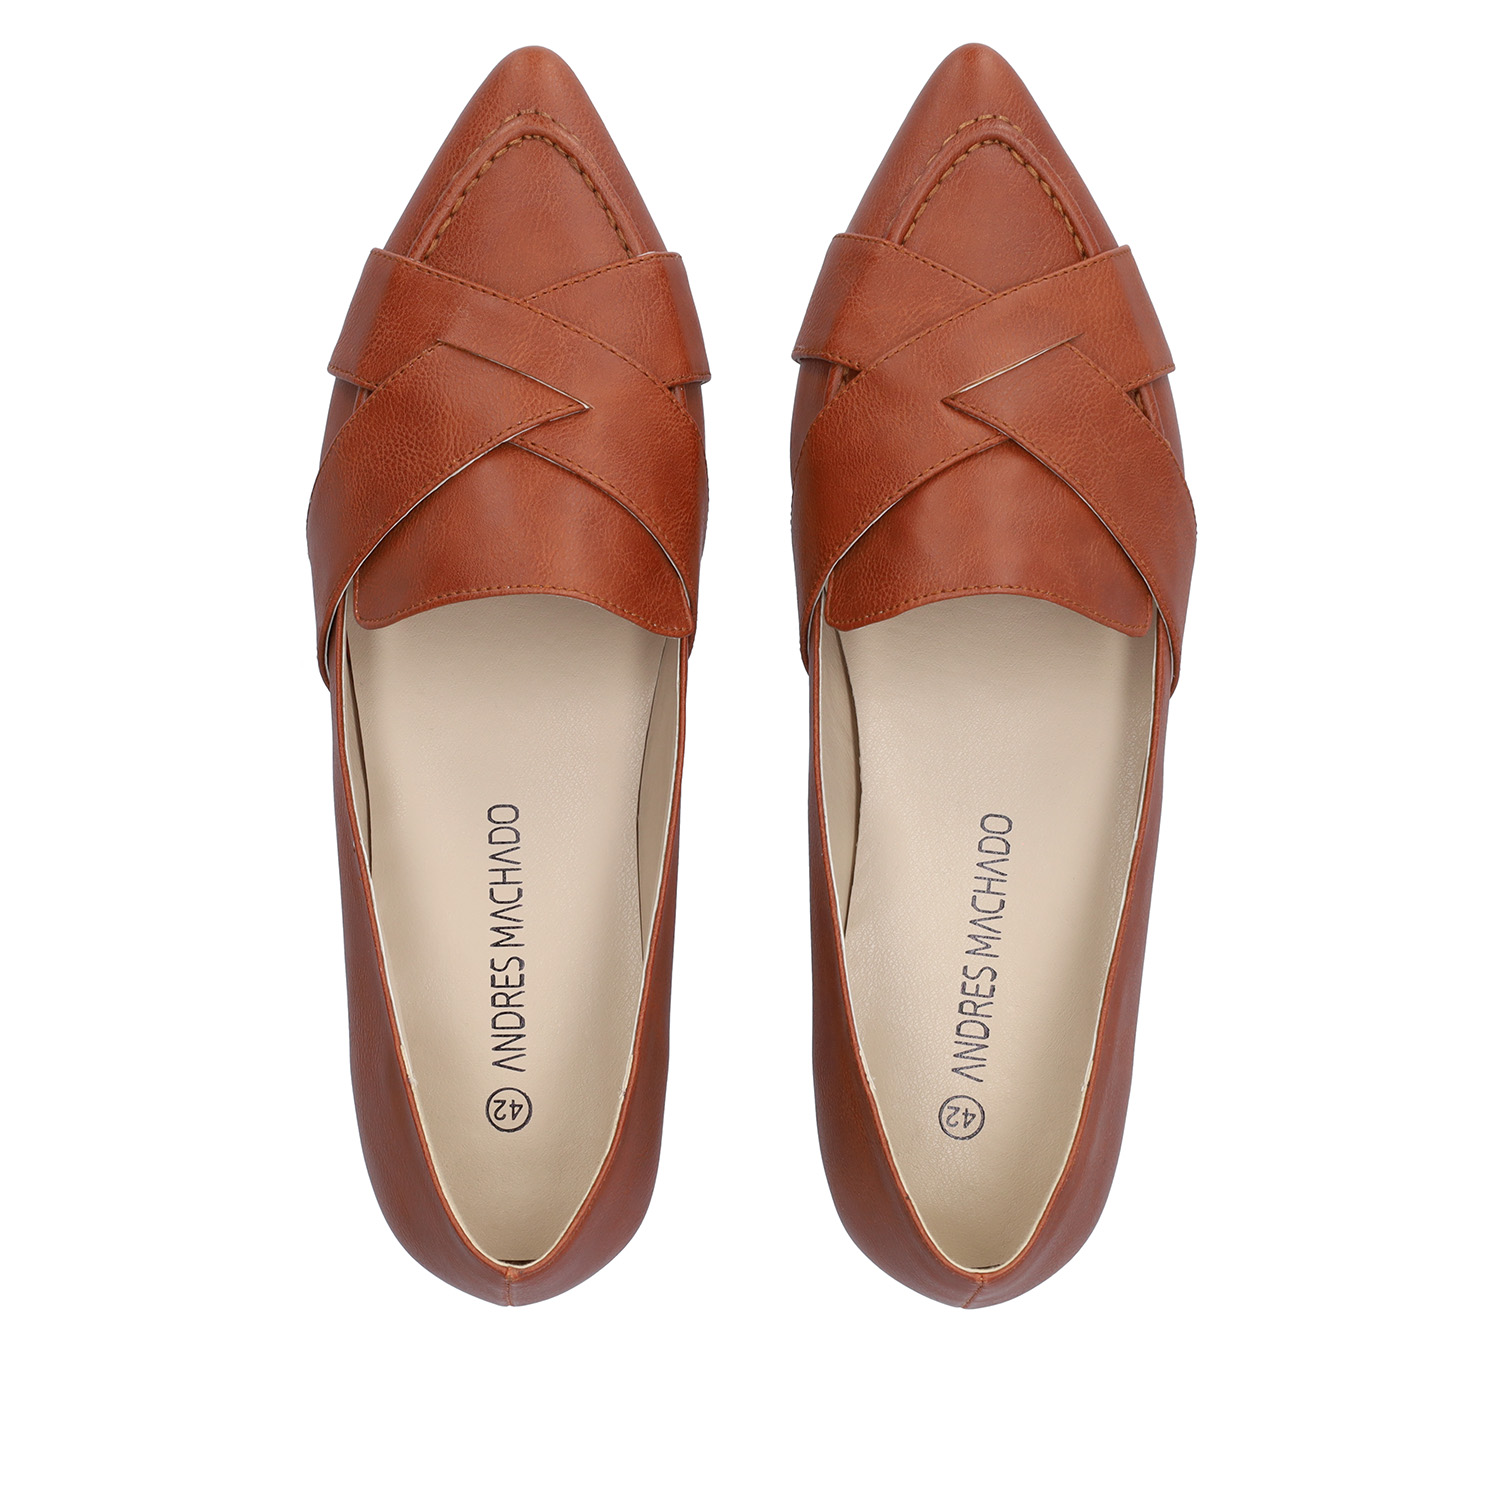 Pointed toe loafers in brown faux leather 